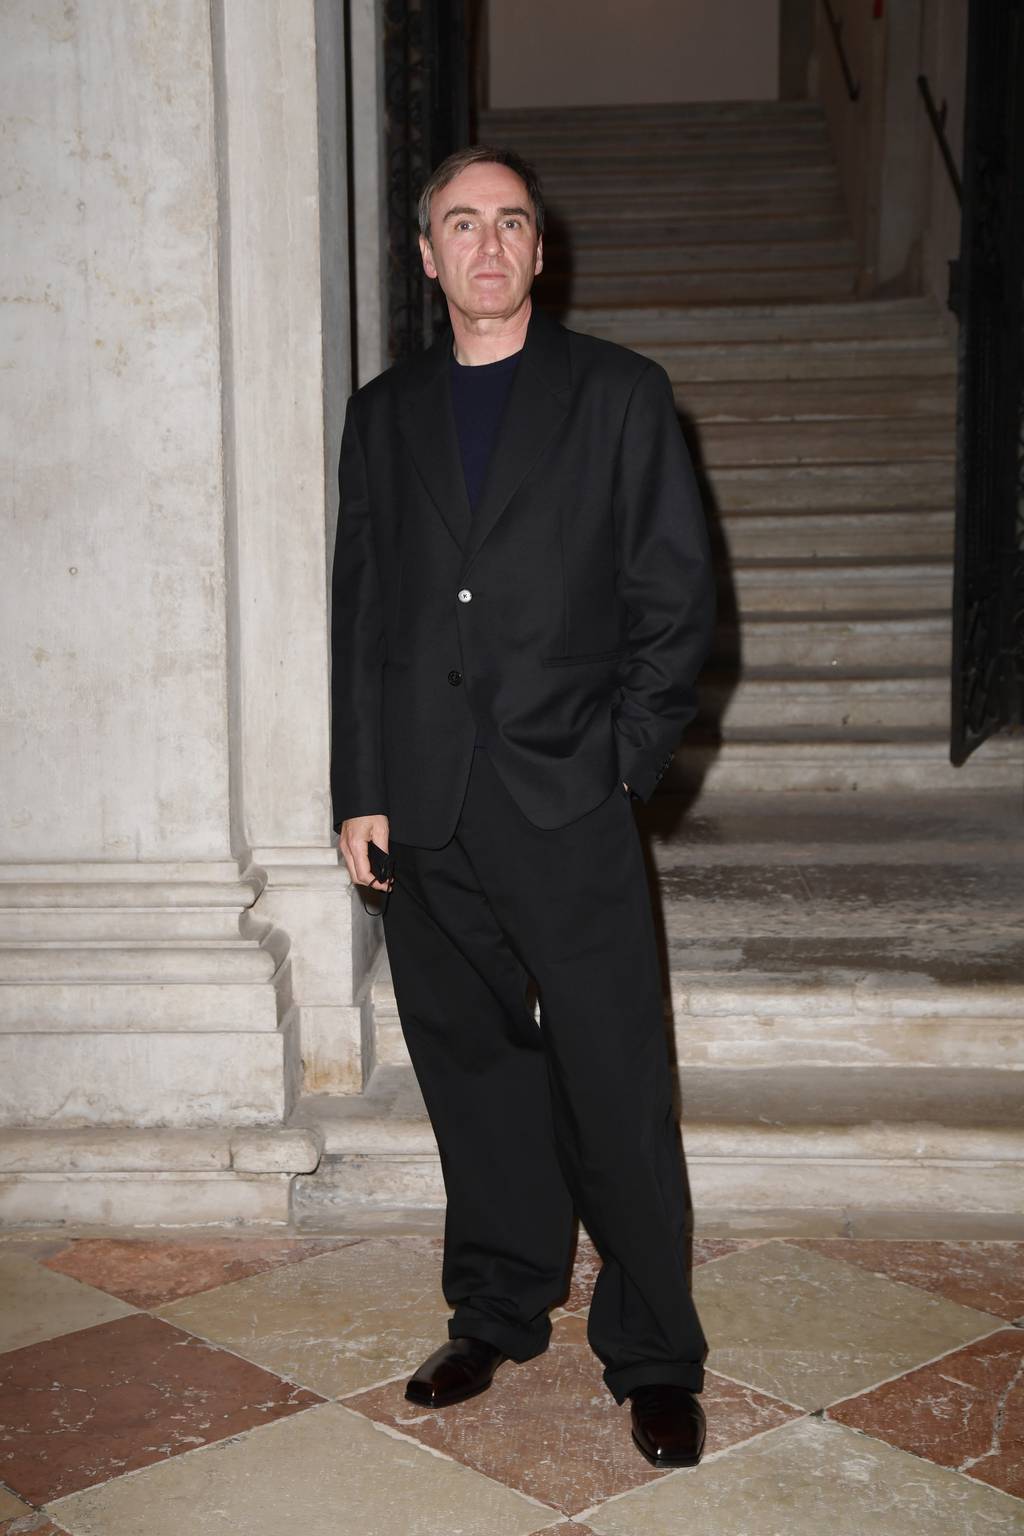 Raf Simons attends the opening of "Human Brains: It Begins with an Idea" at Fondazione Prada in April 2022 in Venice.